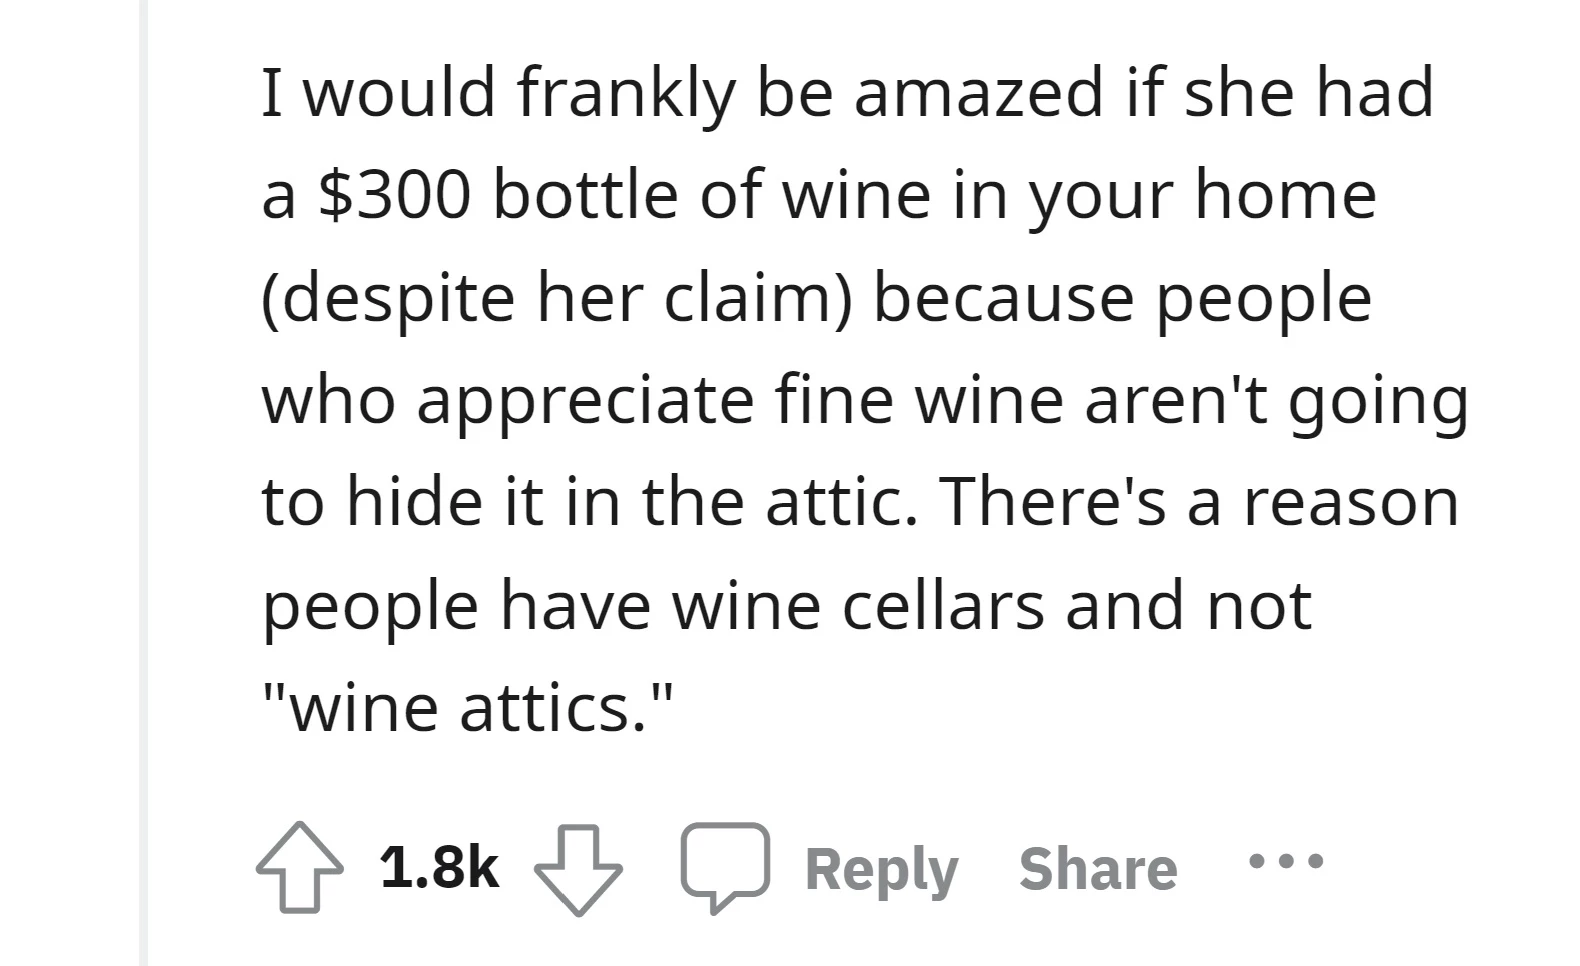 They Maybe Lied About The Wine